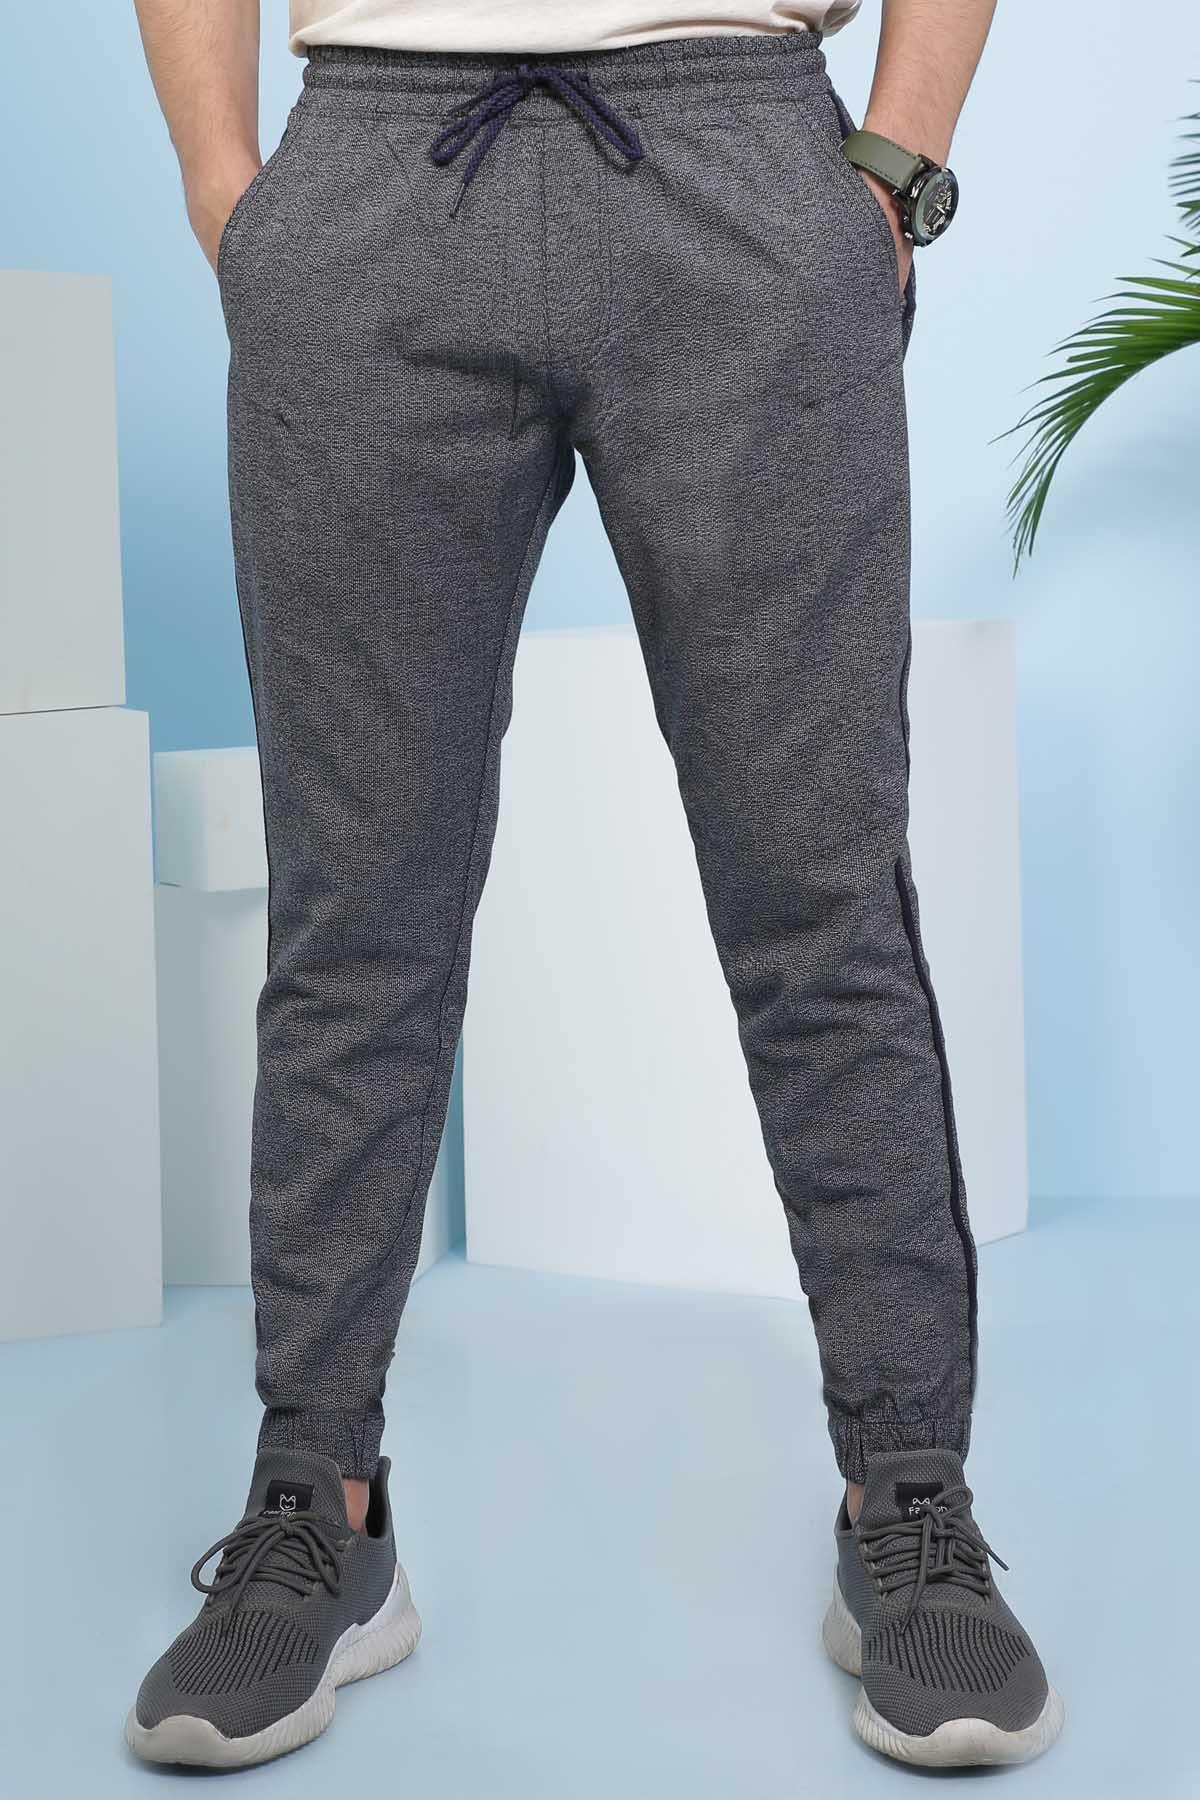 CASUAL TROUSER  SLIM FIT BLACK GREY at Charcoal Clothing